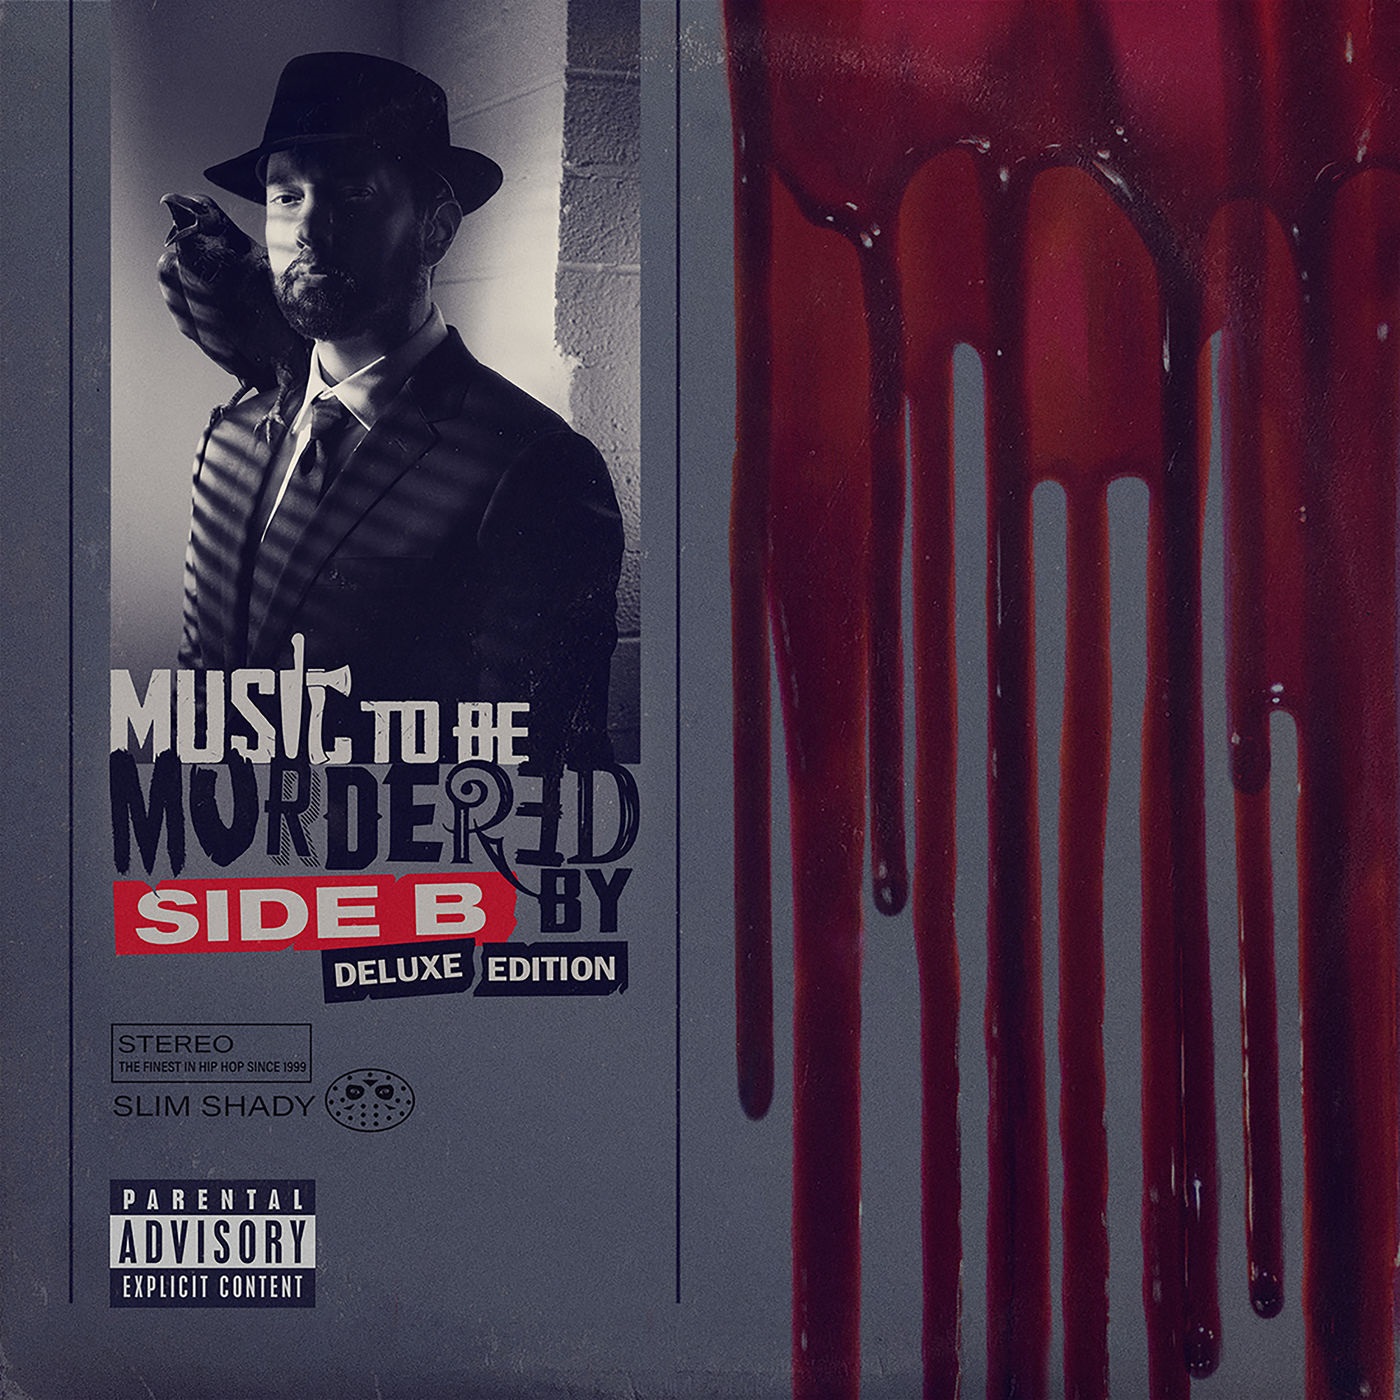 Eminem - Music To Be Murdered By - Side B (Deluxe Edition) (2020) [FLAC 24bit/44,1kHz]